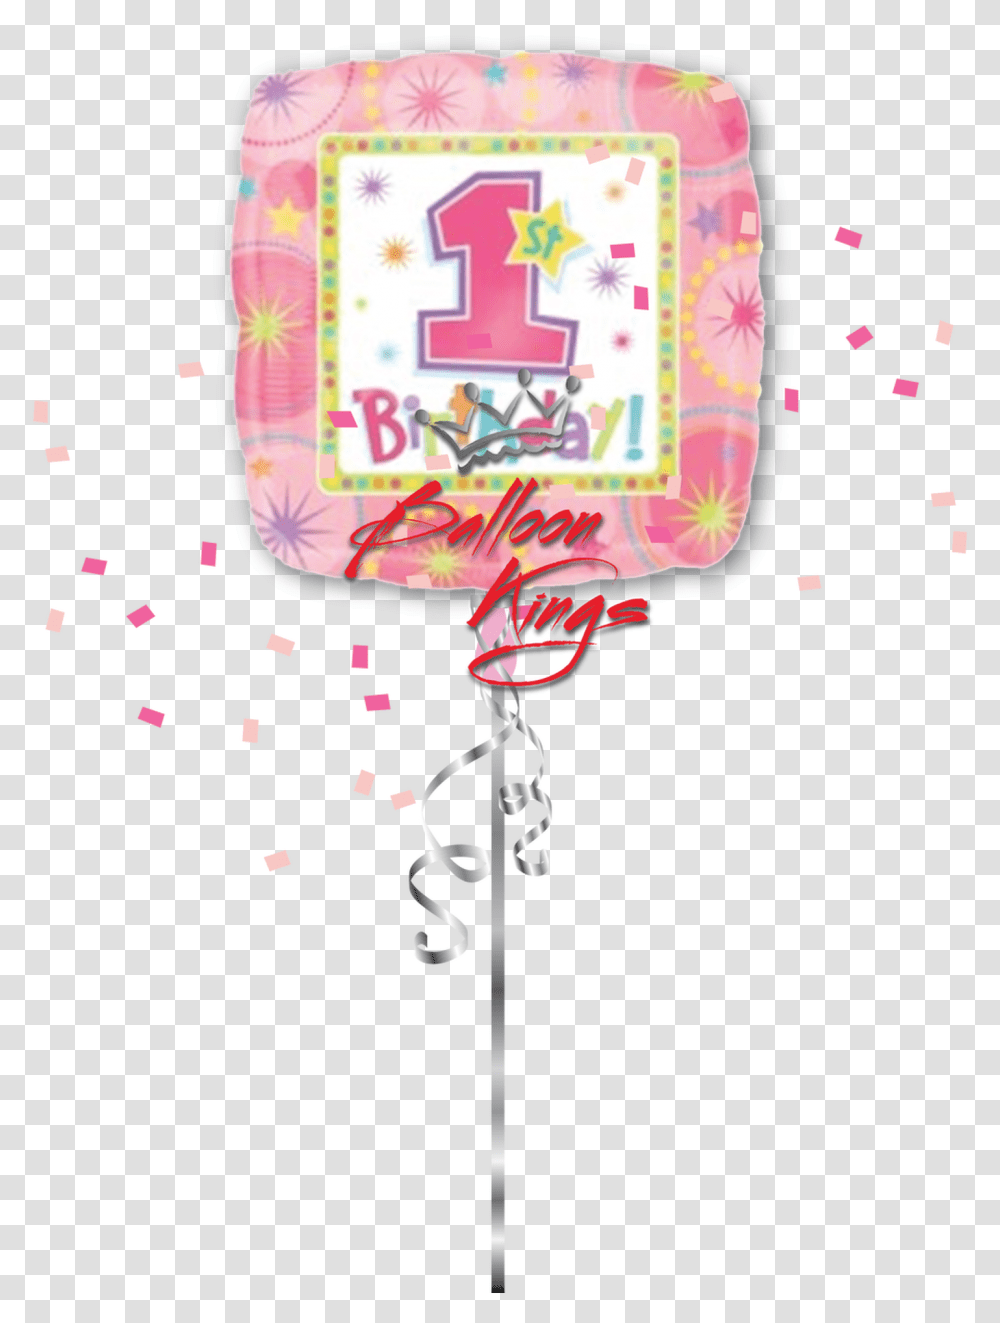 1st Birthday Girl Square Illustration, Pinata, Toy, Sweets Transparent Png